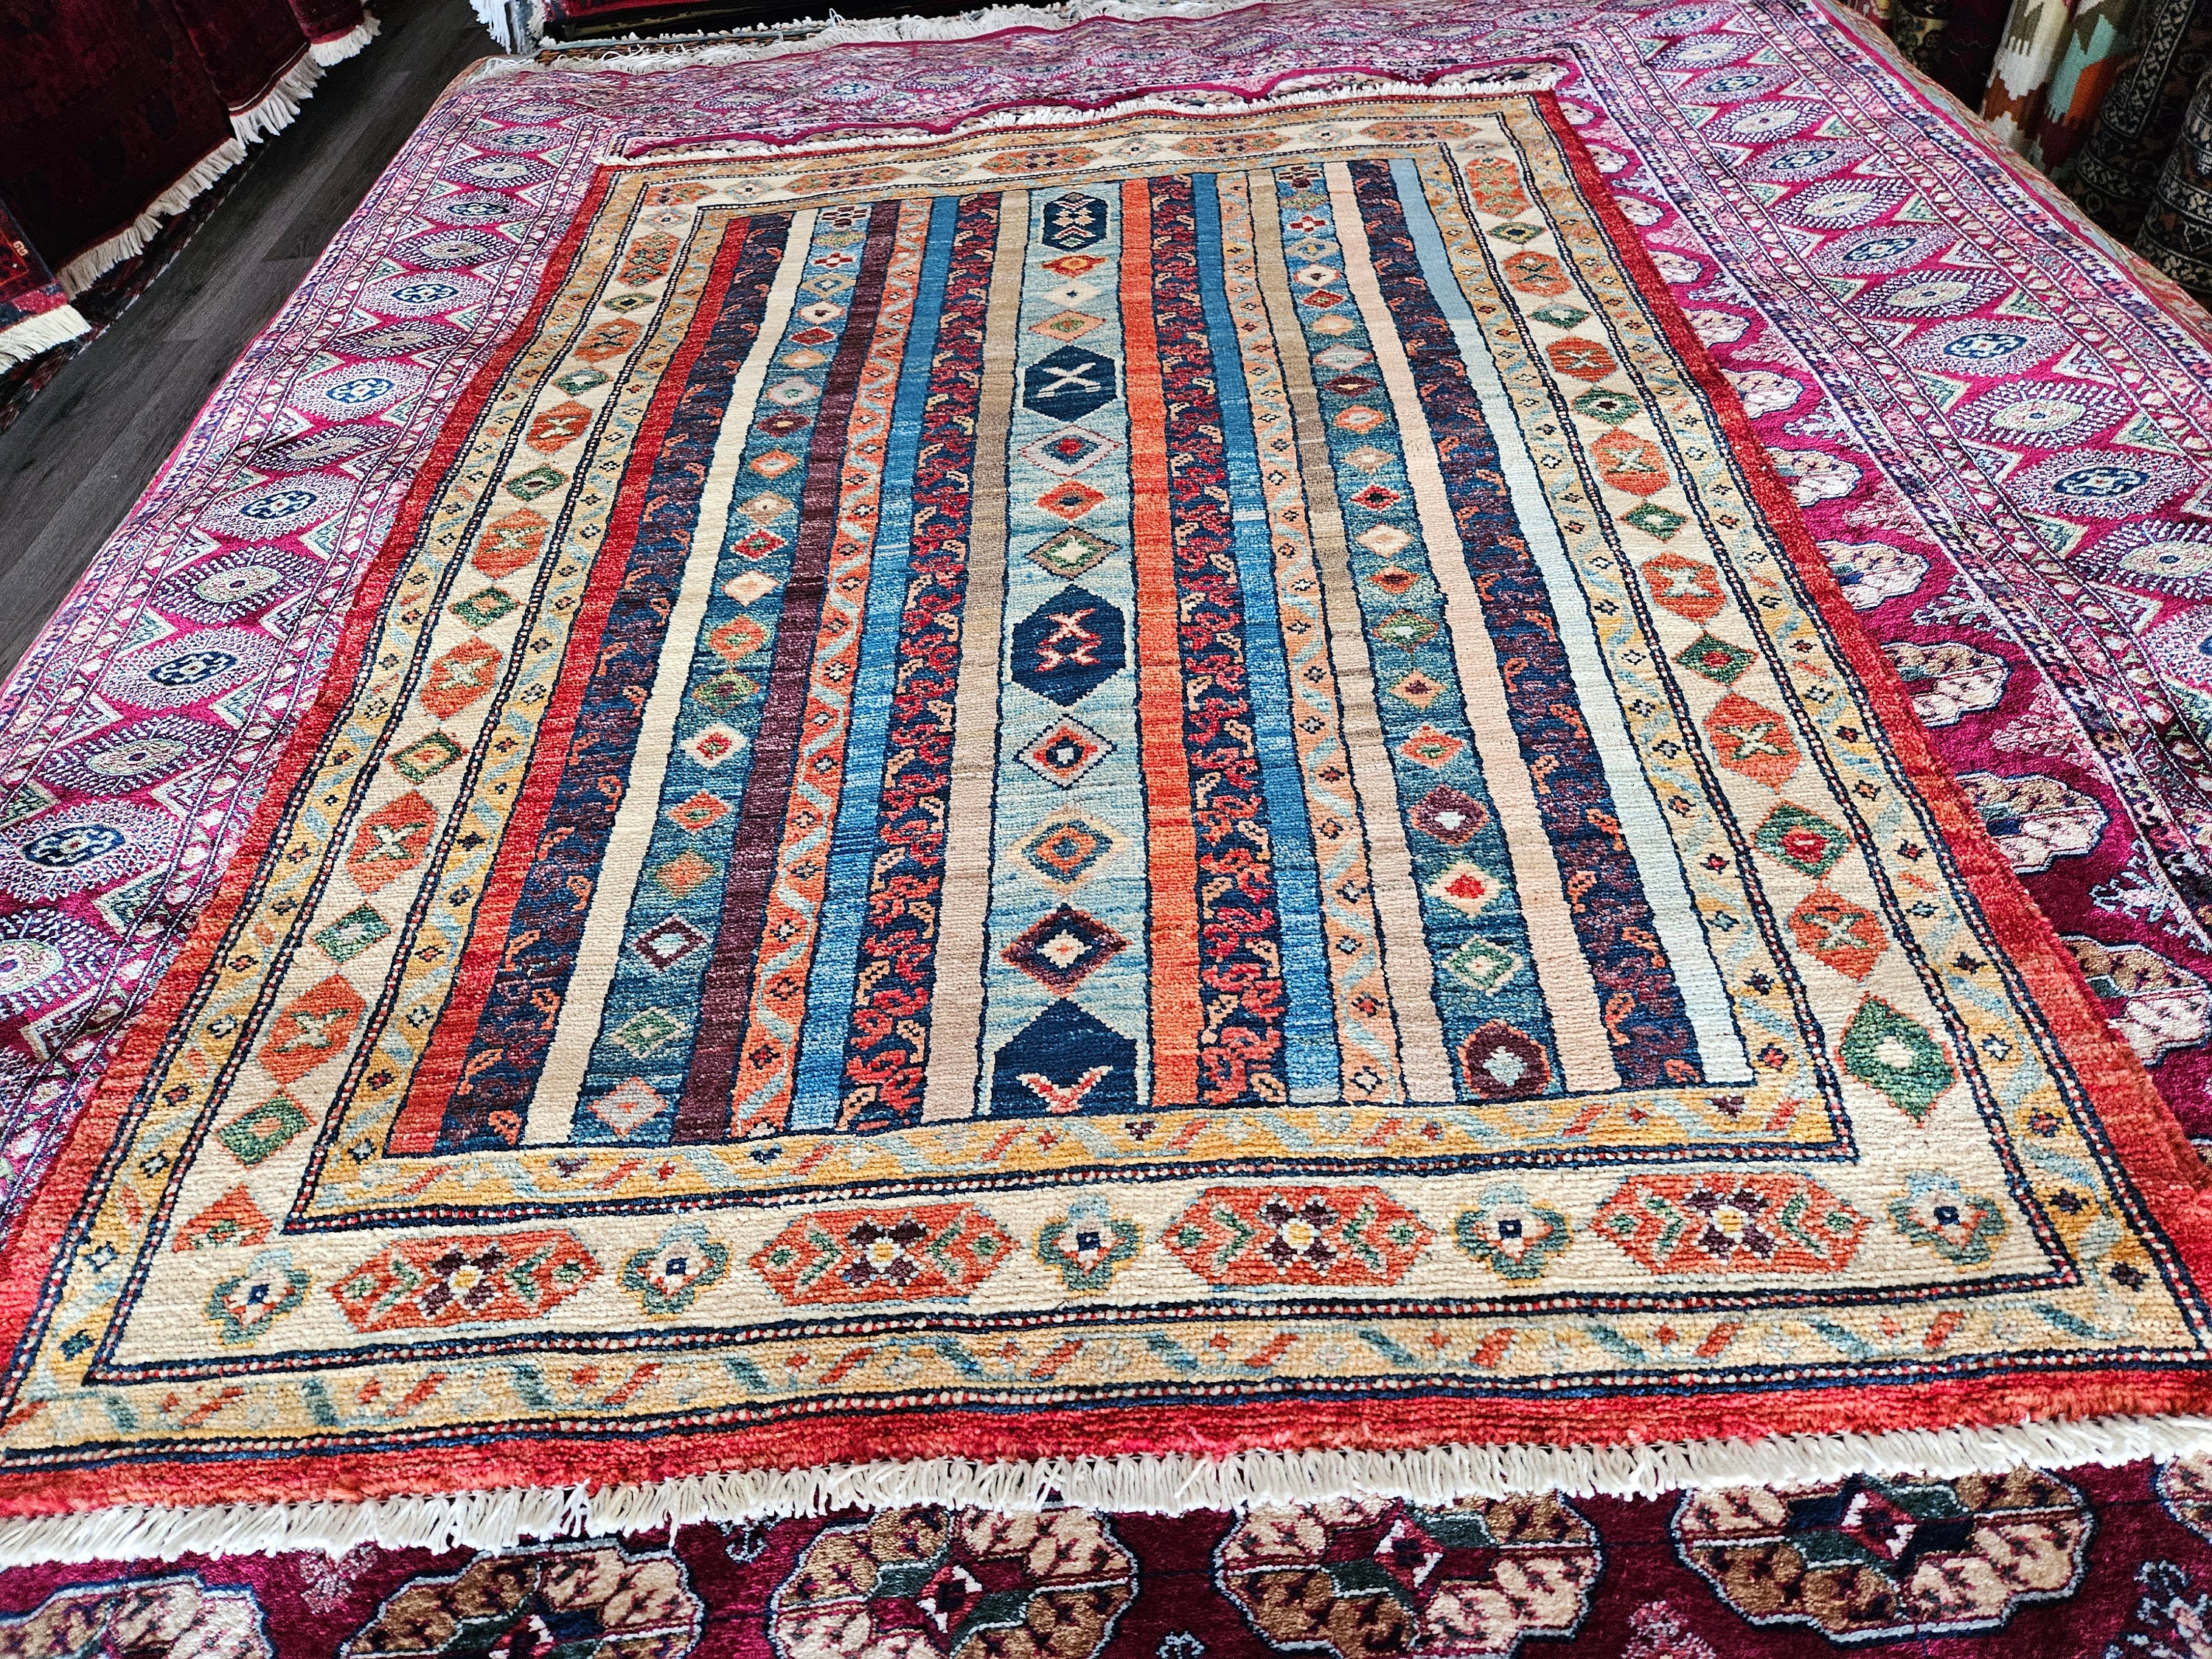 3x5 Authentic Afghan / Persian Rugs, Baluch Carpet